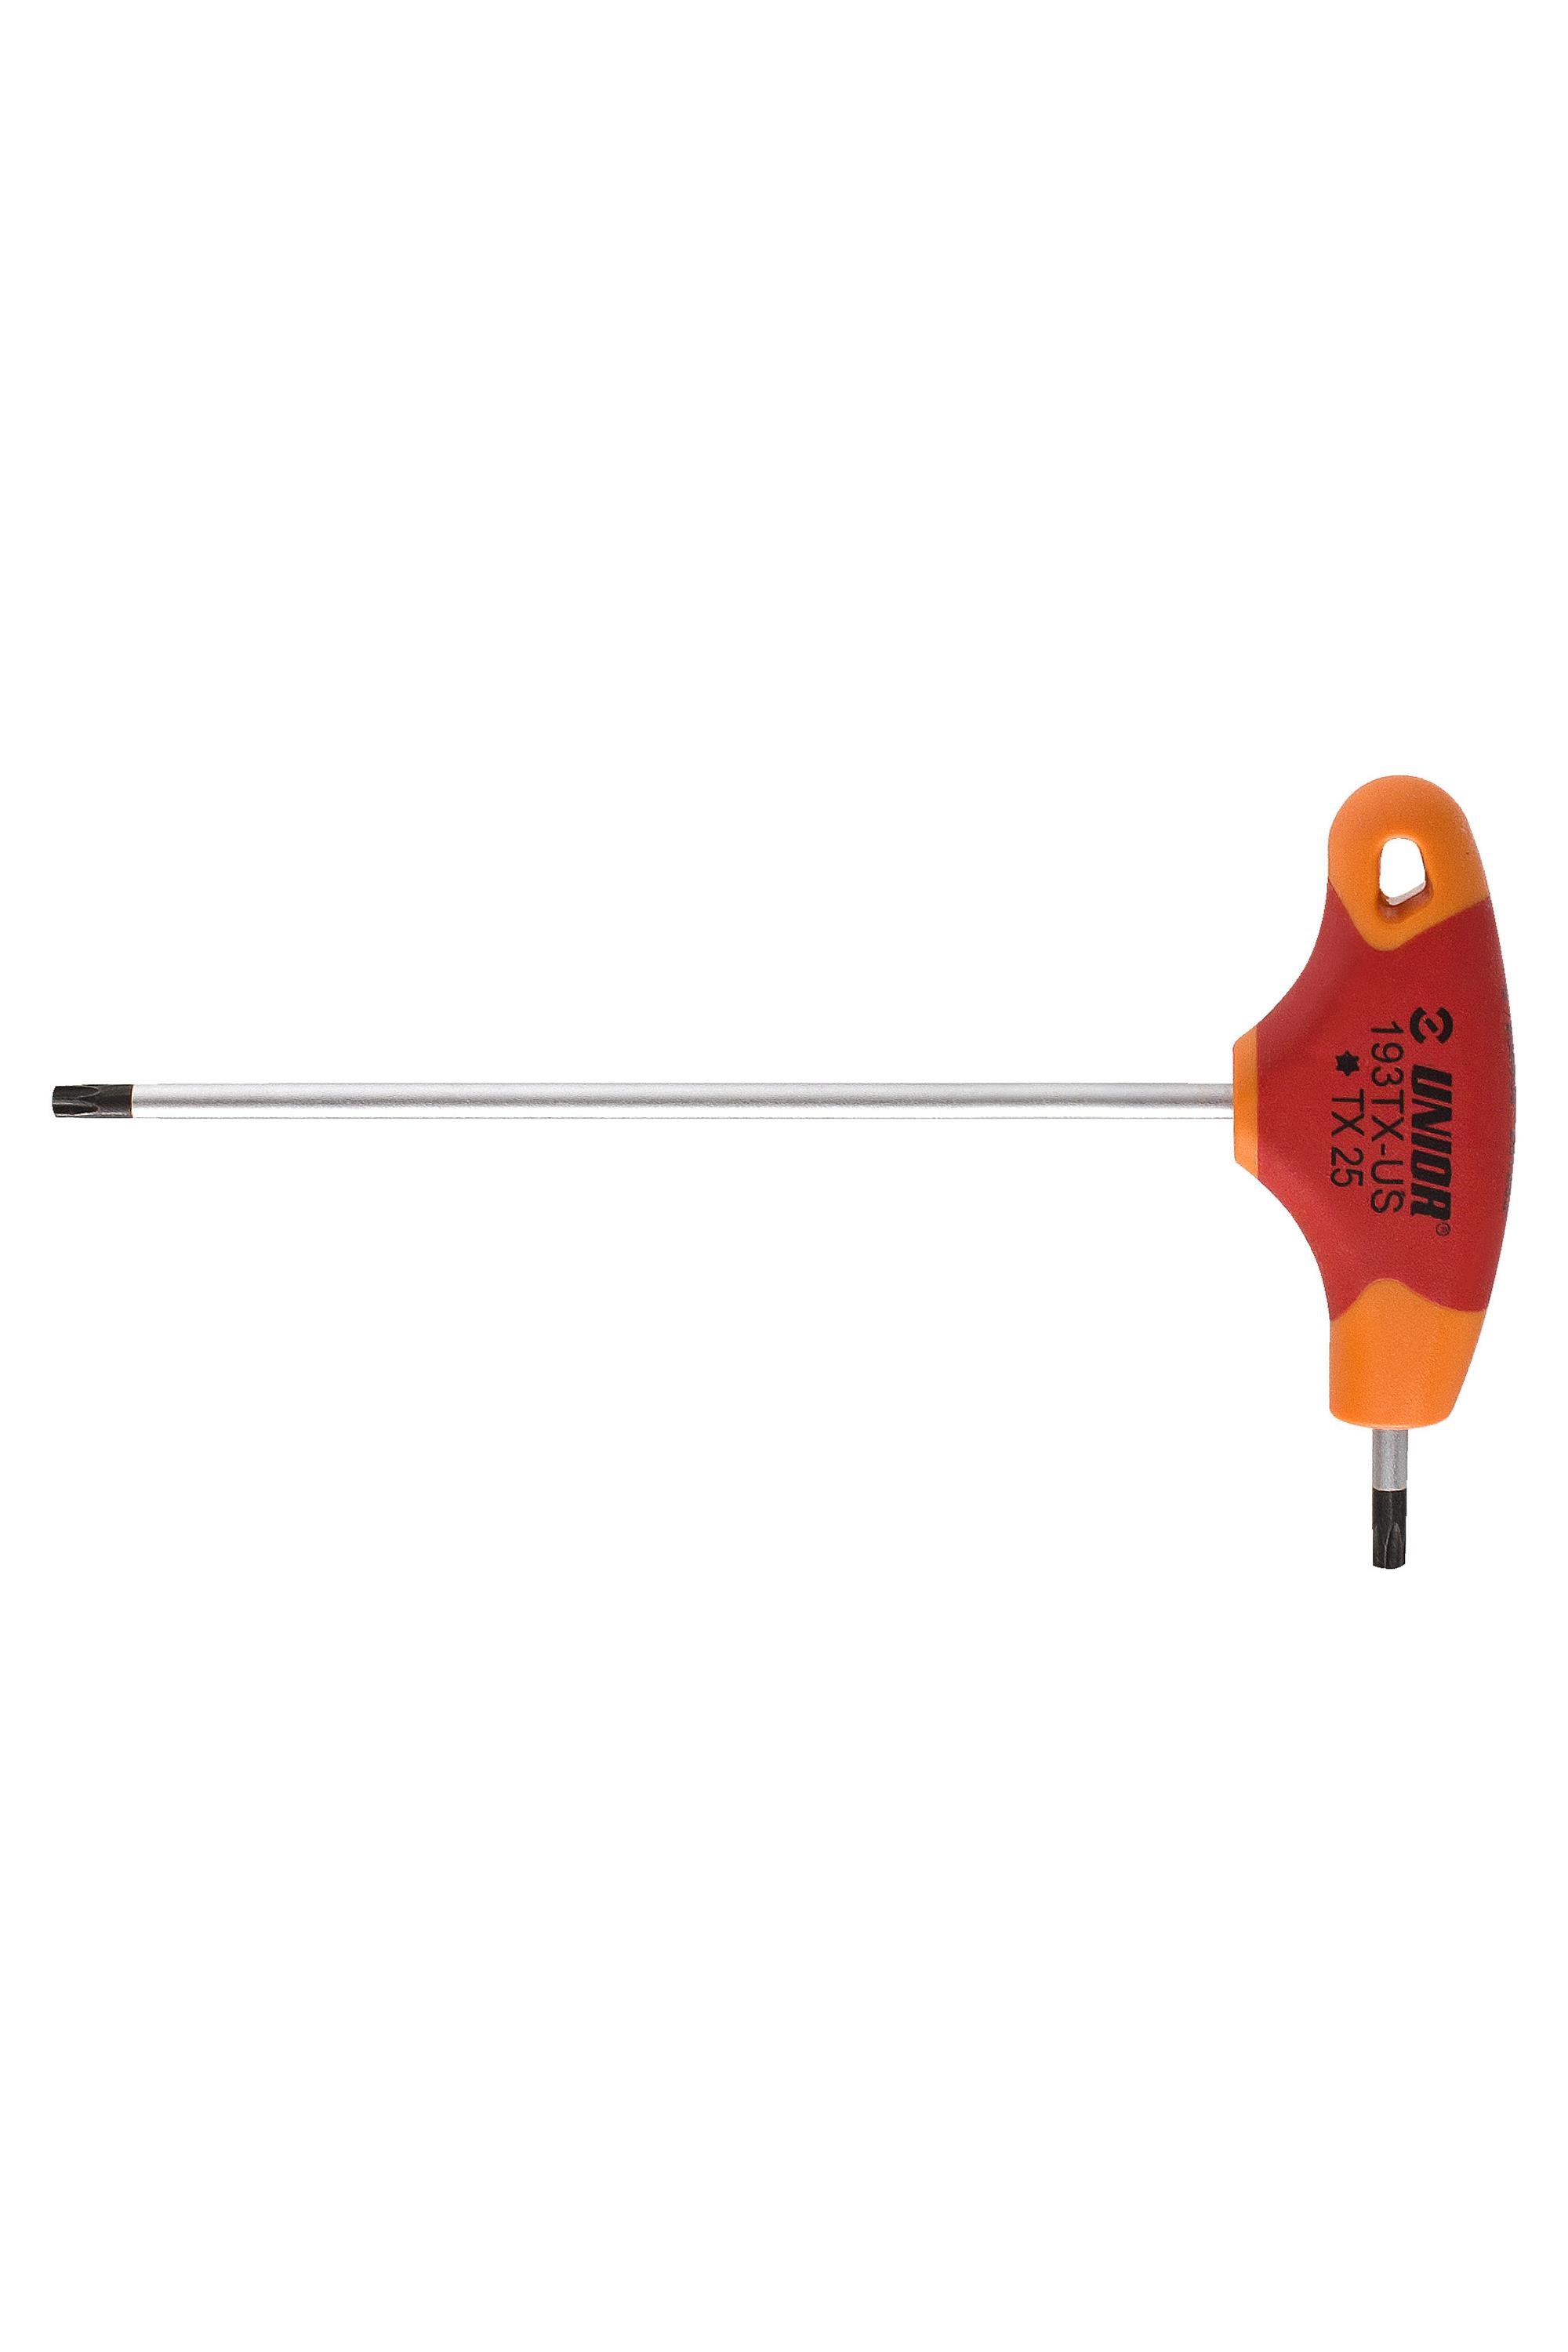 TX Profile Screwdriver With T-Handle -